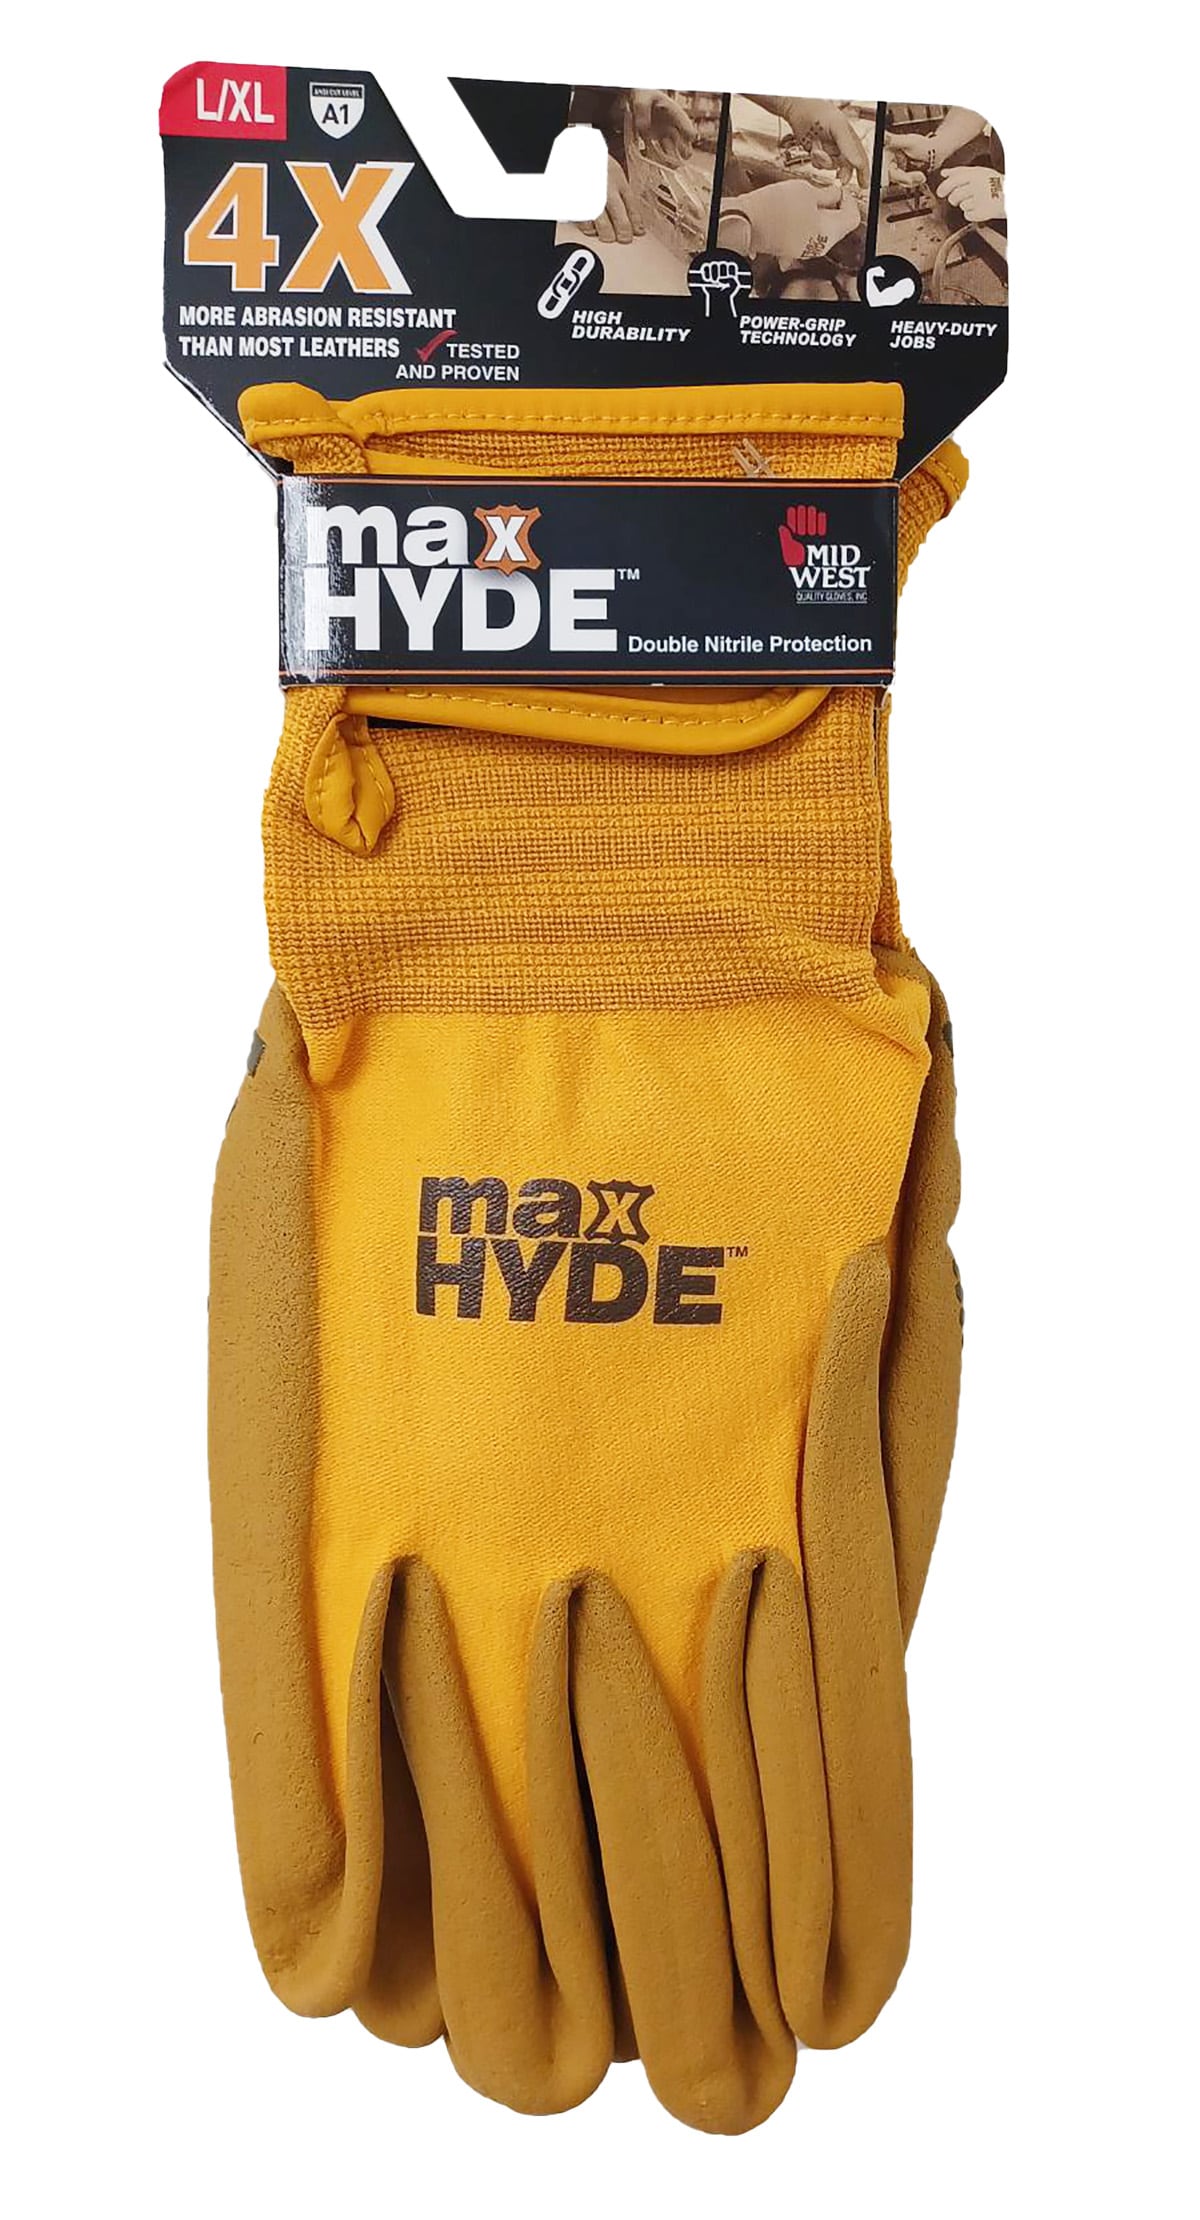 Midwest Quality Gloves, Inc. Gloves, Outwears, 3 to 1, L/XL, Max Grip